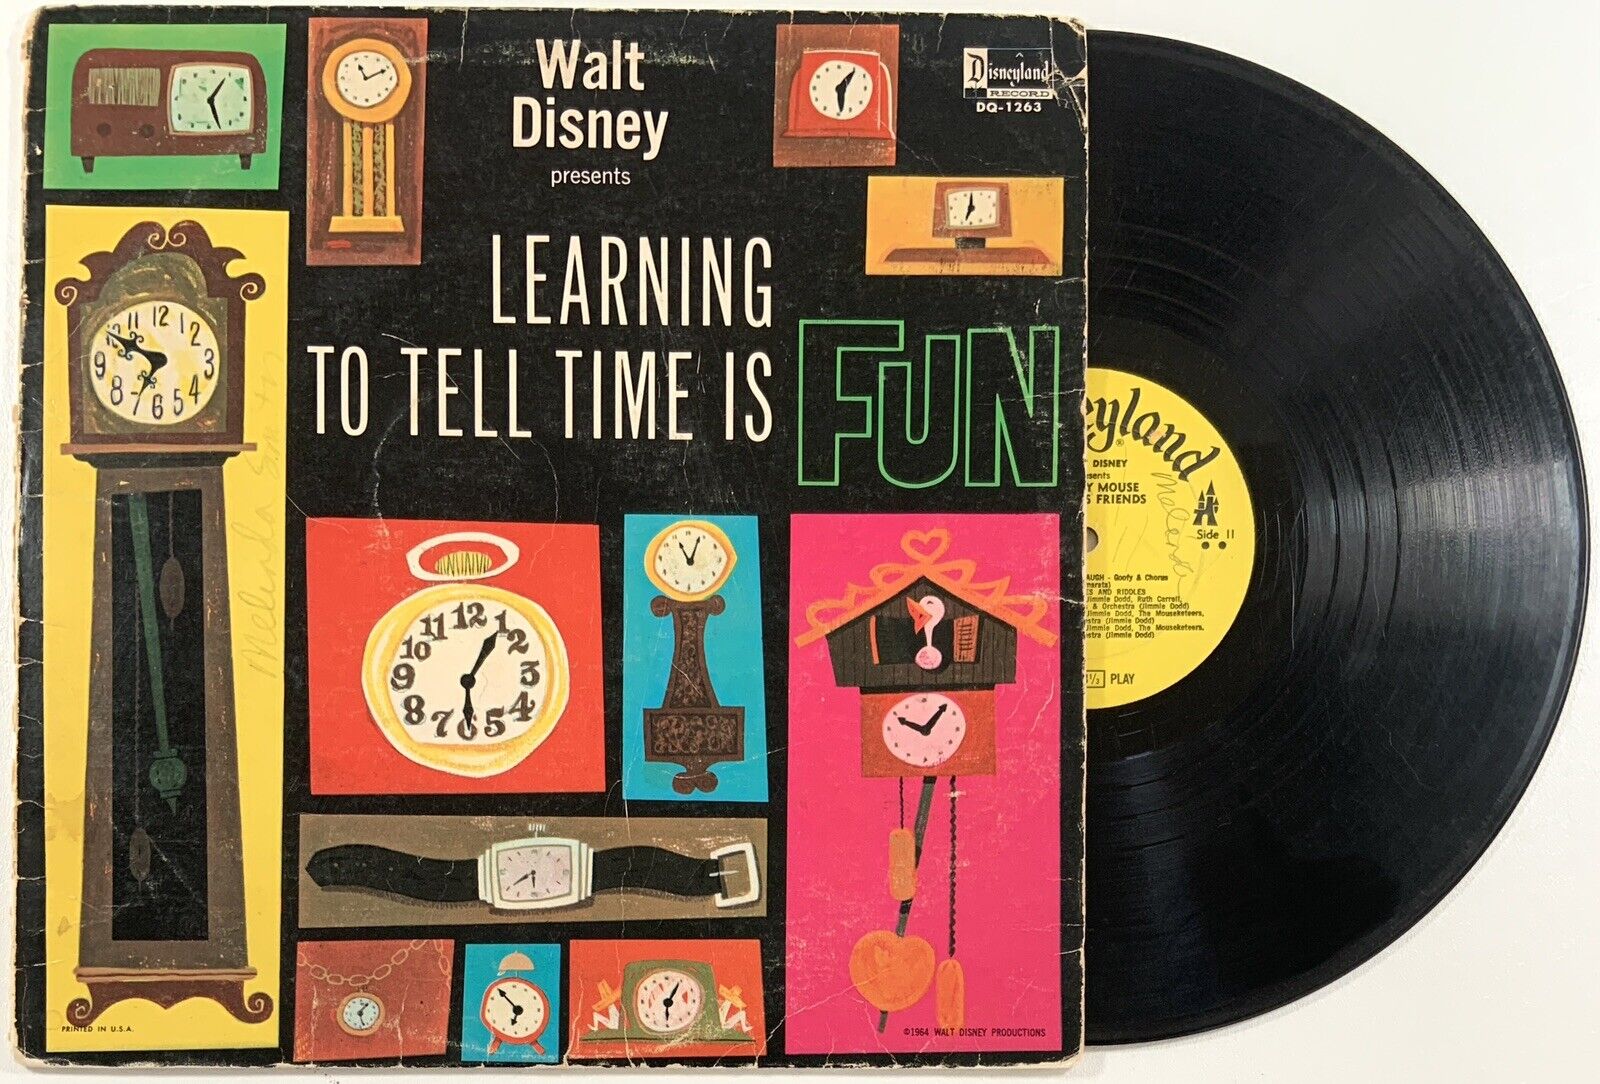 Disneyland Records “Learning To Tell Time Is Fun” Vintage 1964 Story Vinyl LP